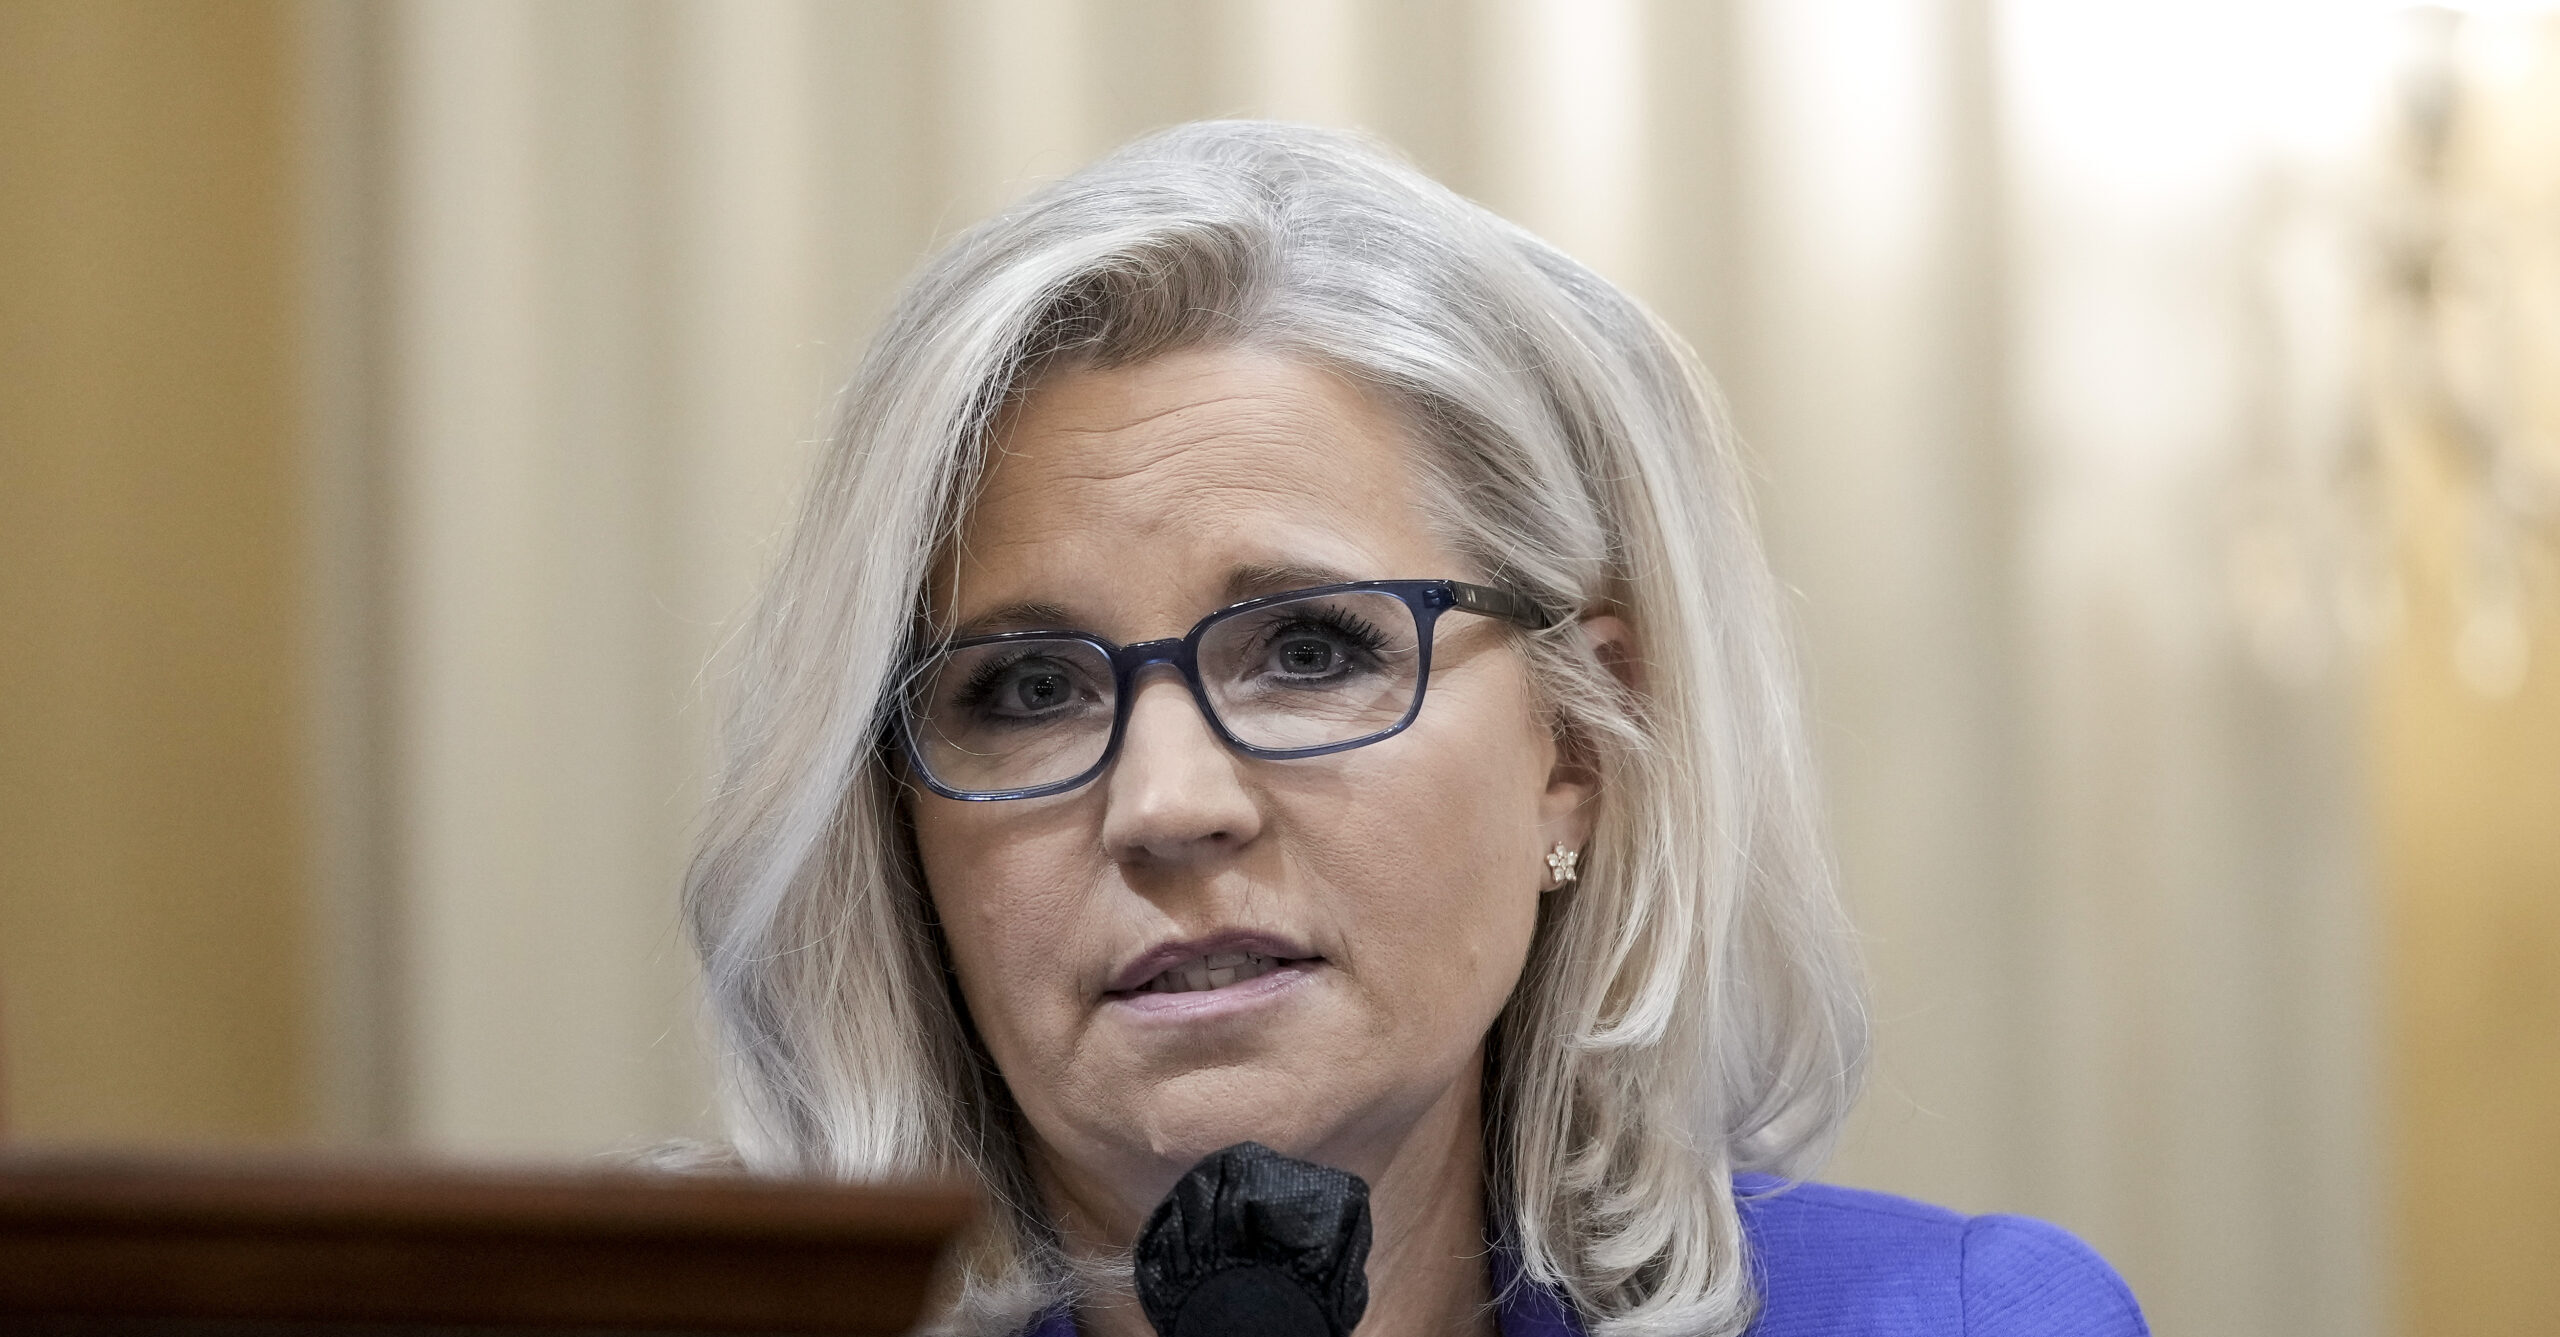 Liz Cheney Rips ‘Chameleon’ Ted Cruz ‘Who Will Say Anything’ to Get Ahead